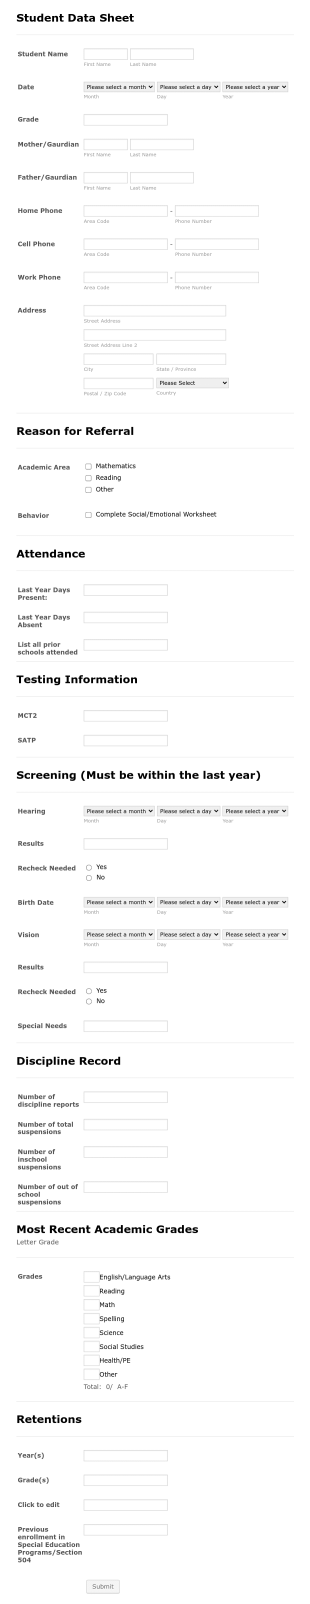 Student Data Form Template